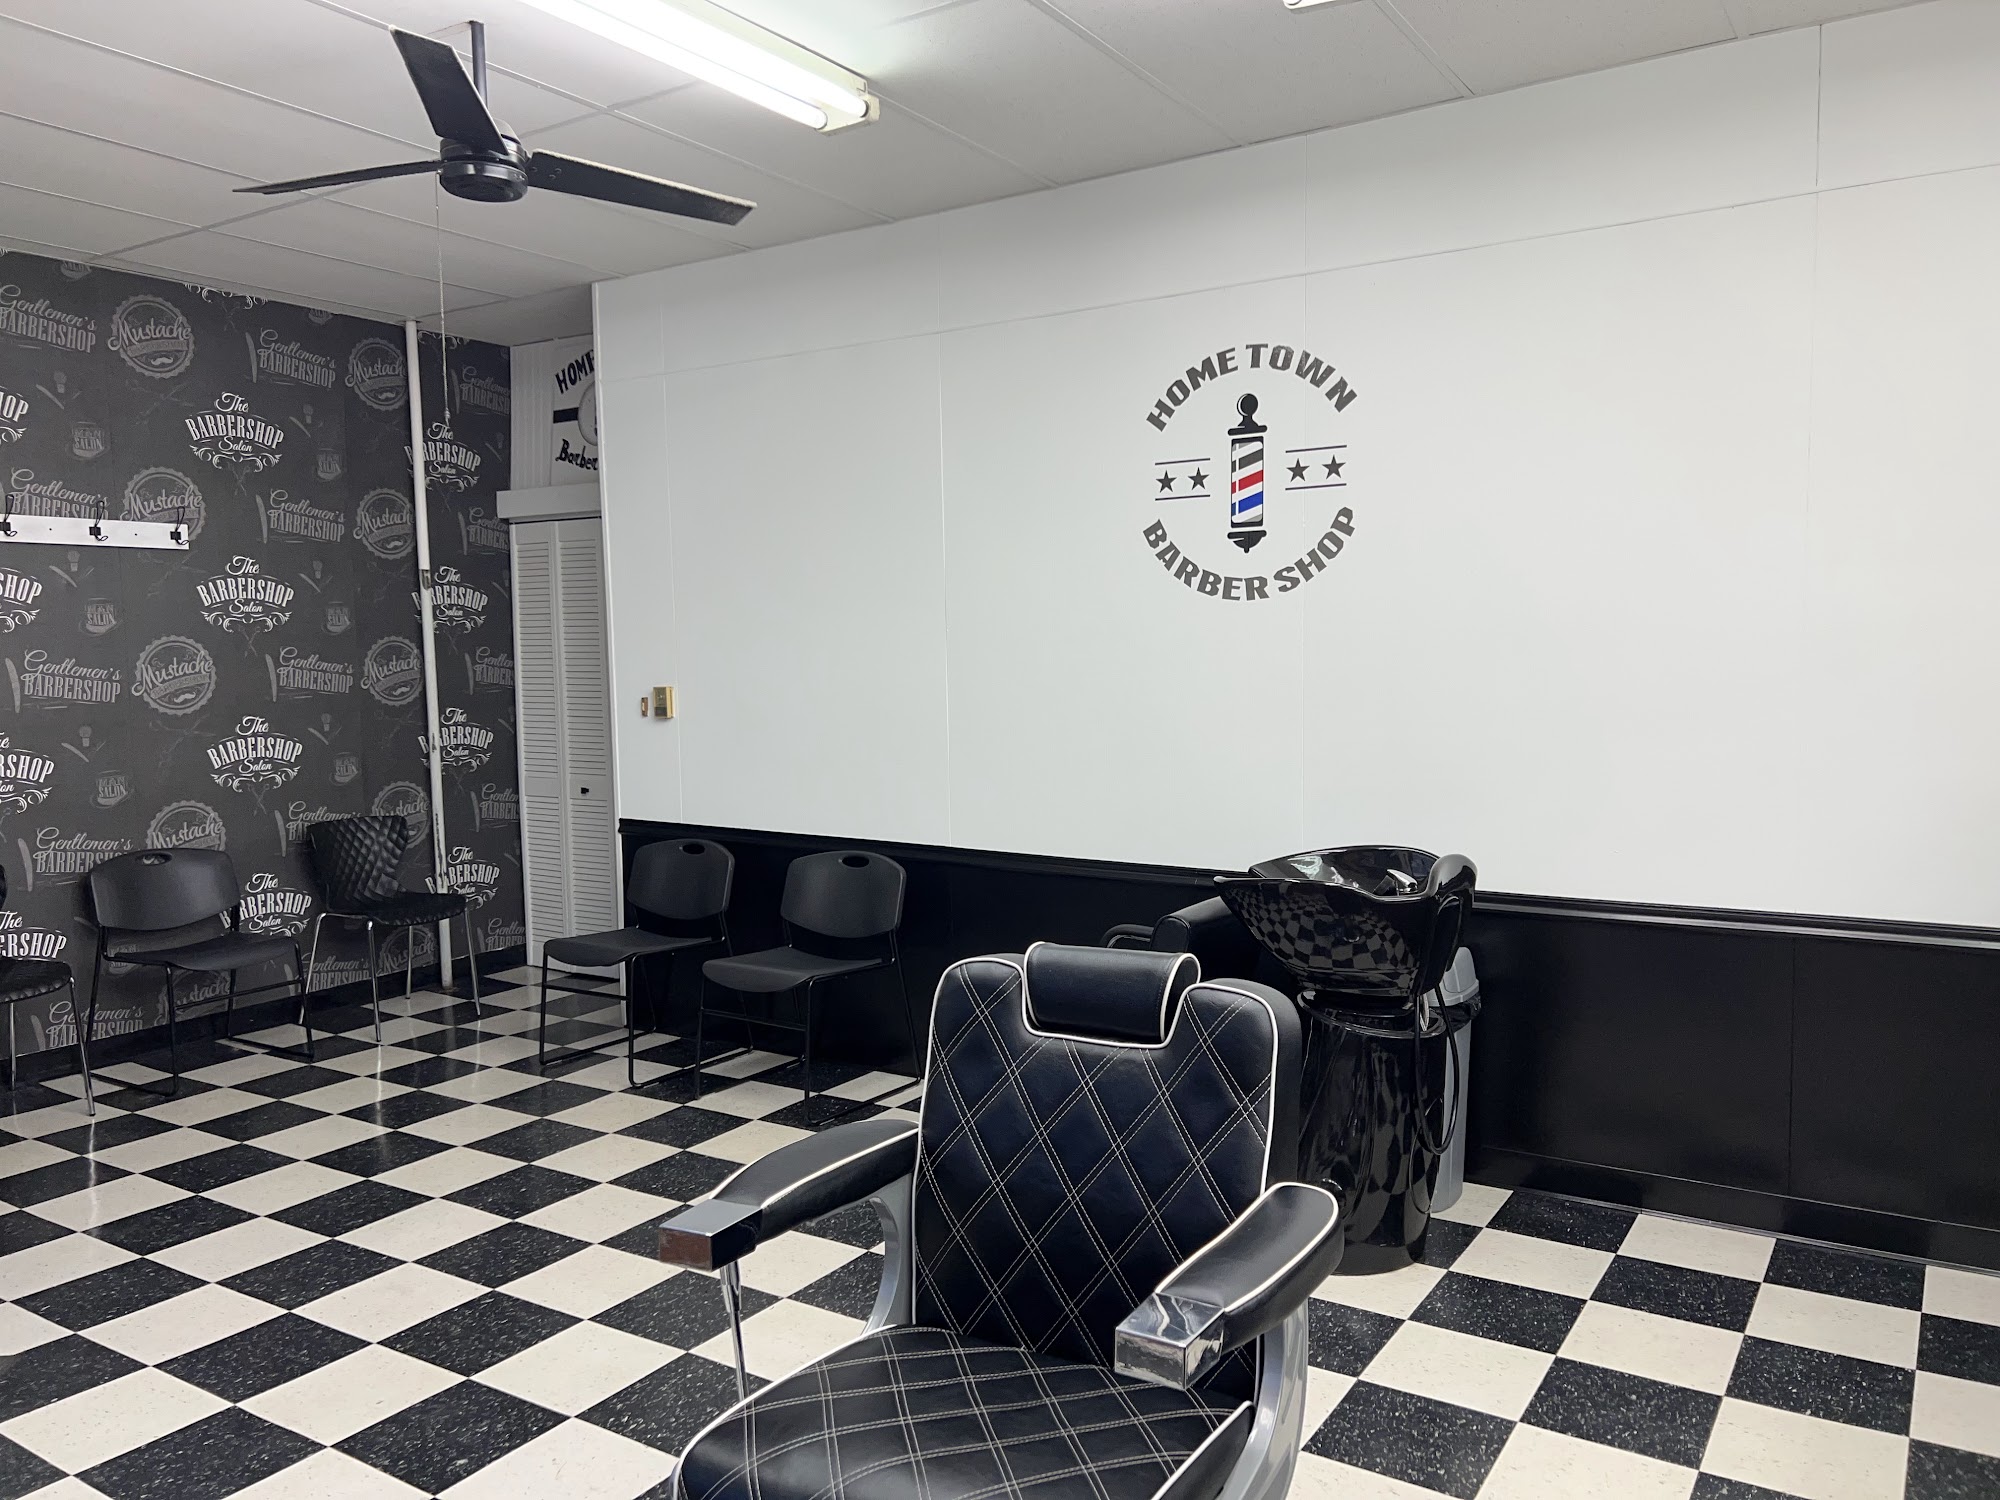 Home Town Barber Shop